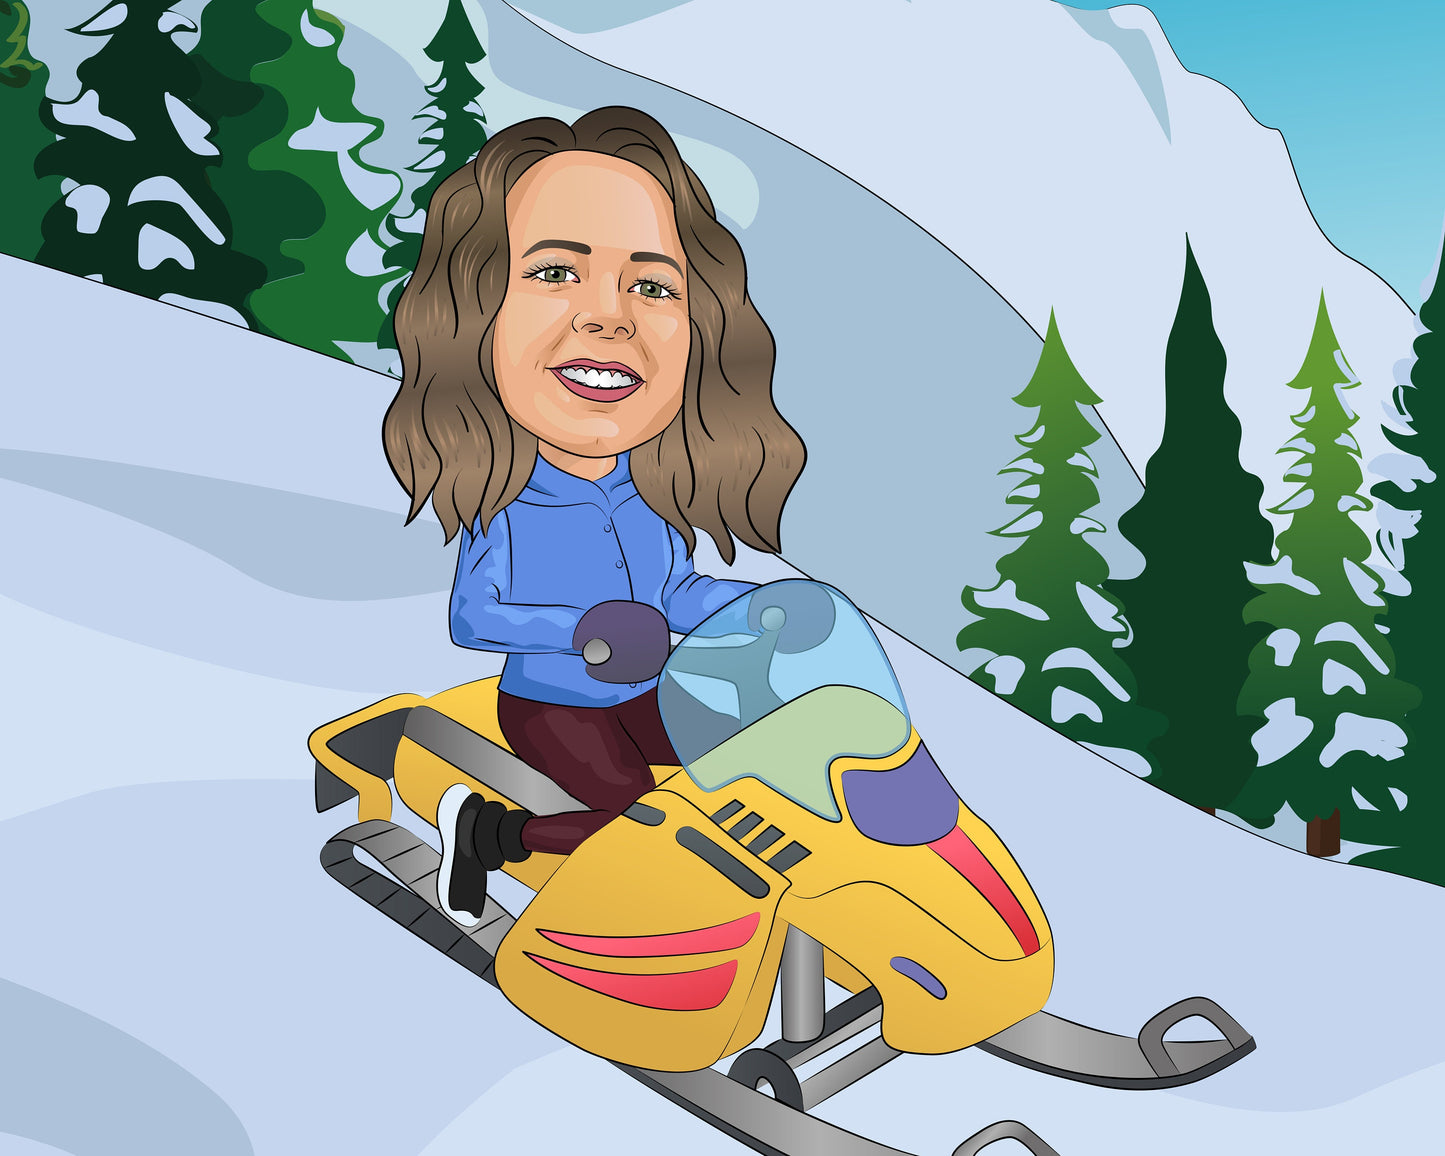 Snowmobiler Gift - Custom Caricature Portrait From Your Photo/snowmobiling